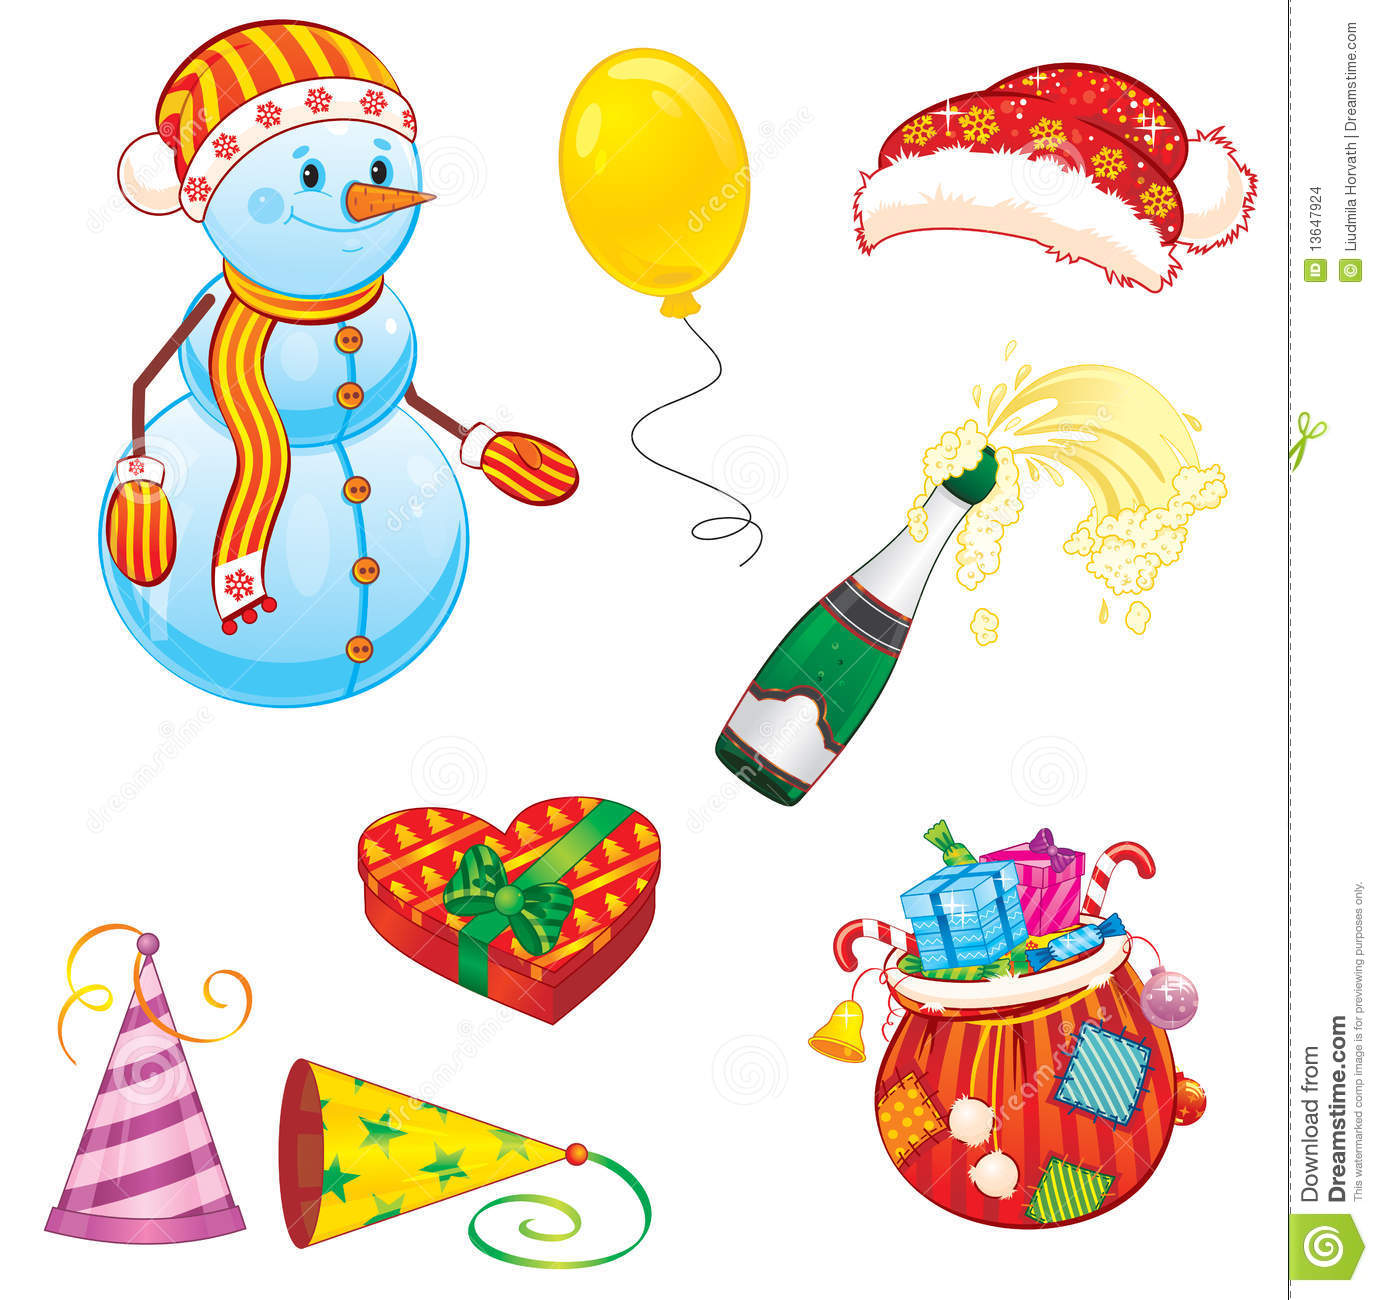 Christmas Clip Art Stock Images   Image  13647924